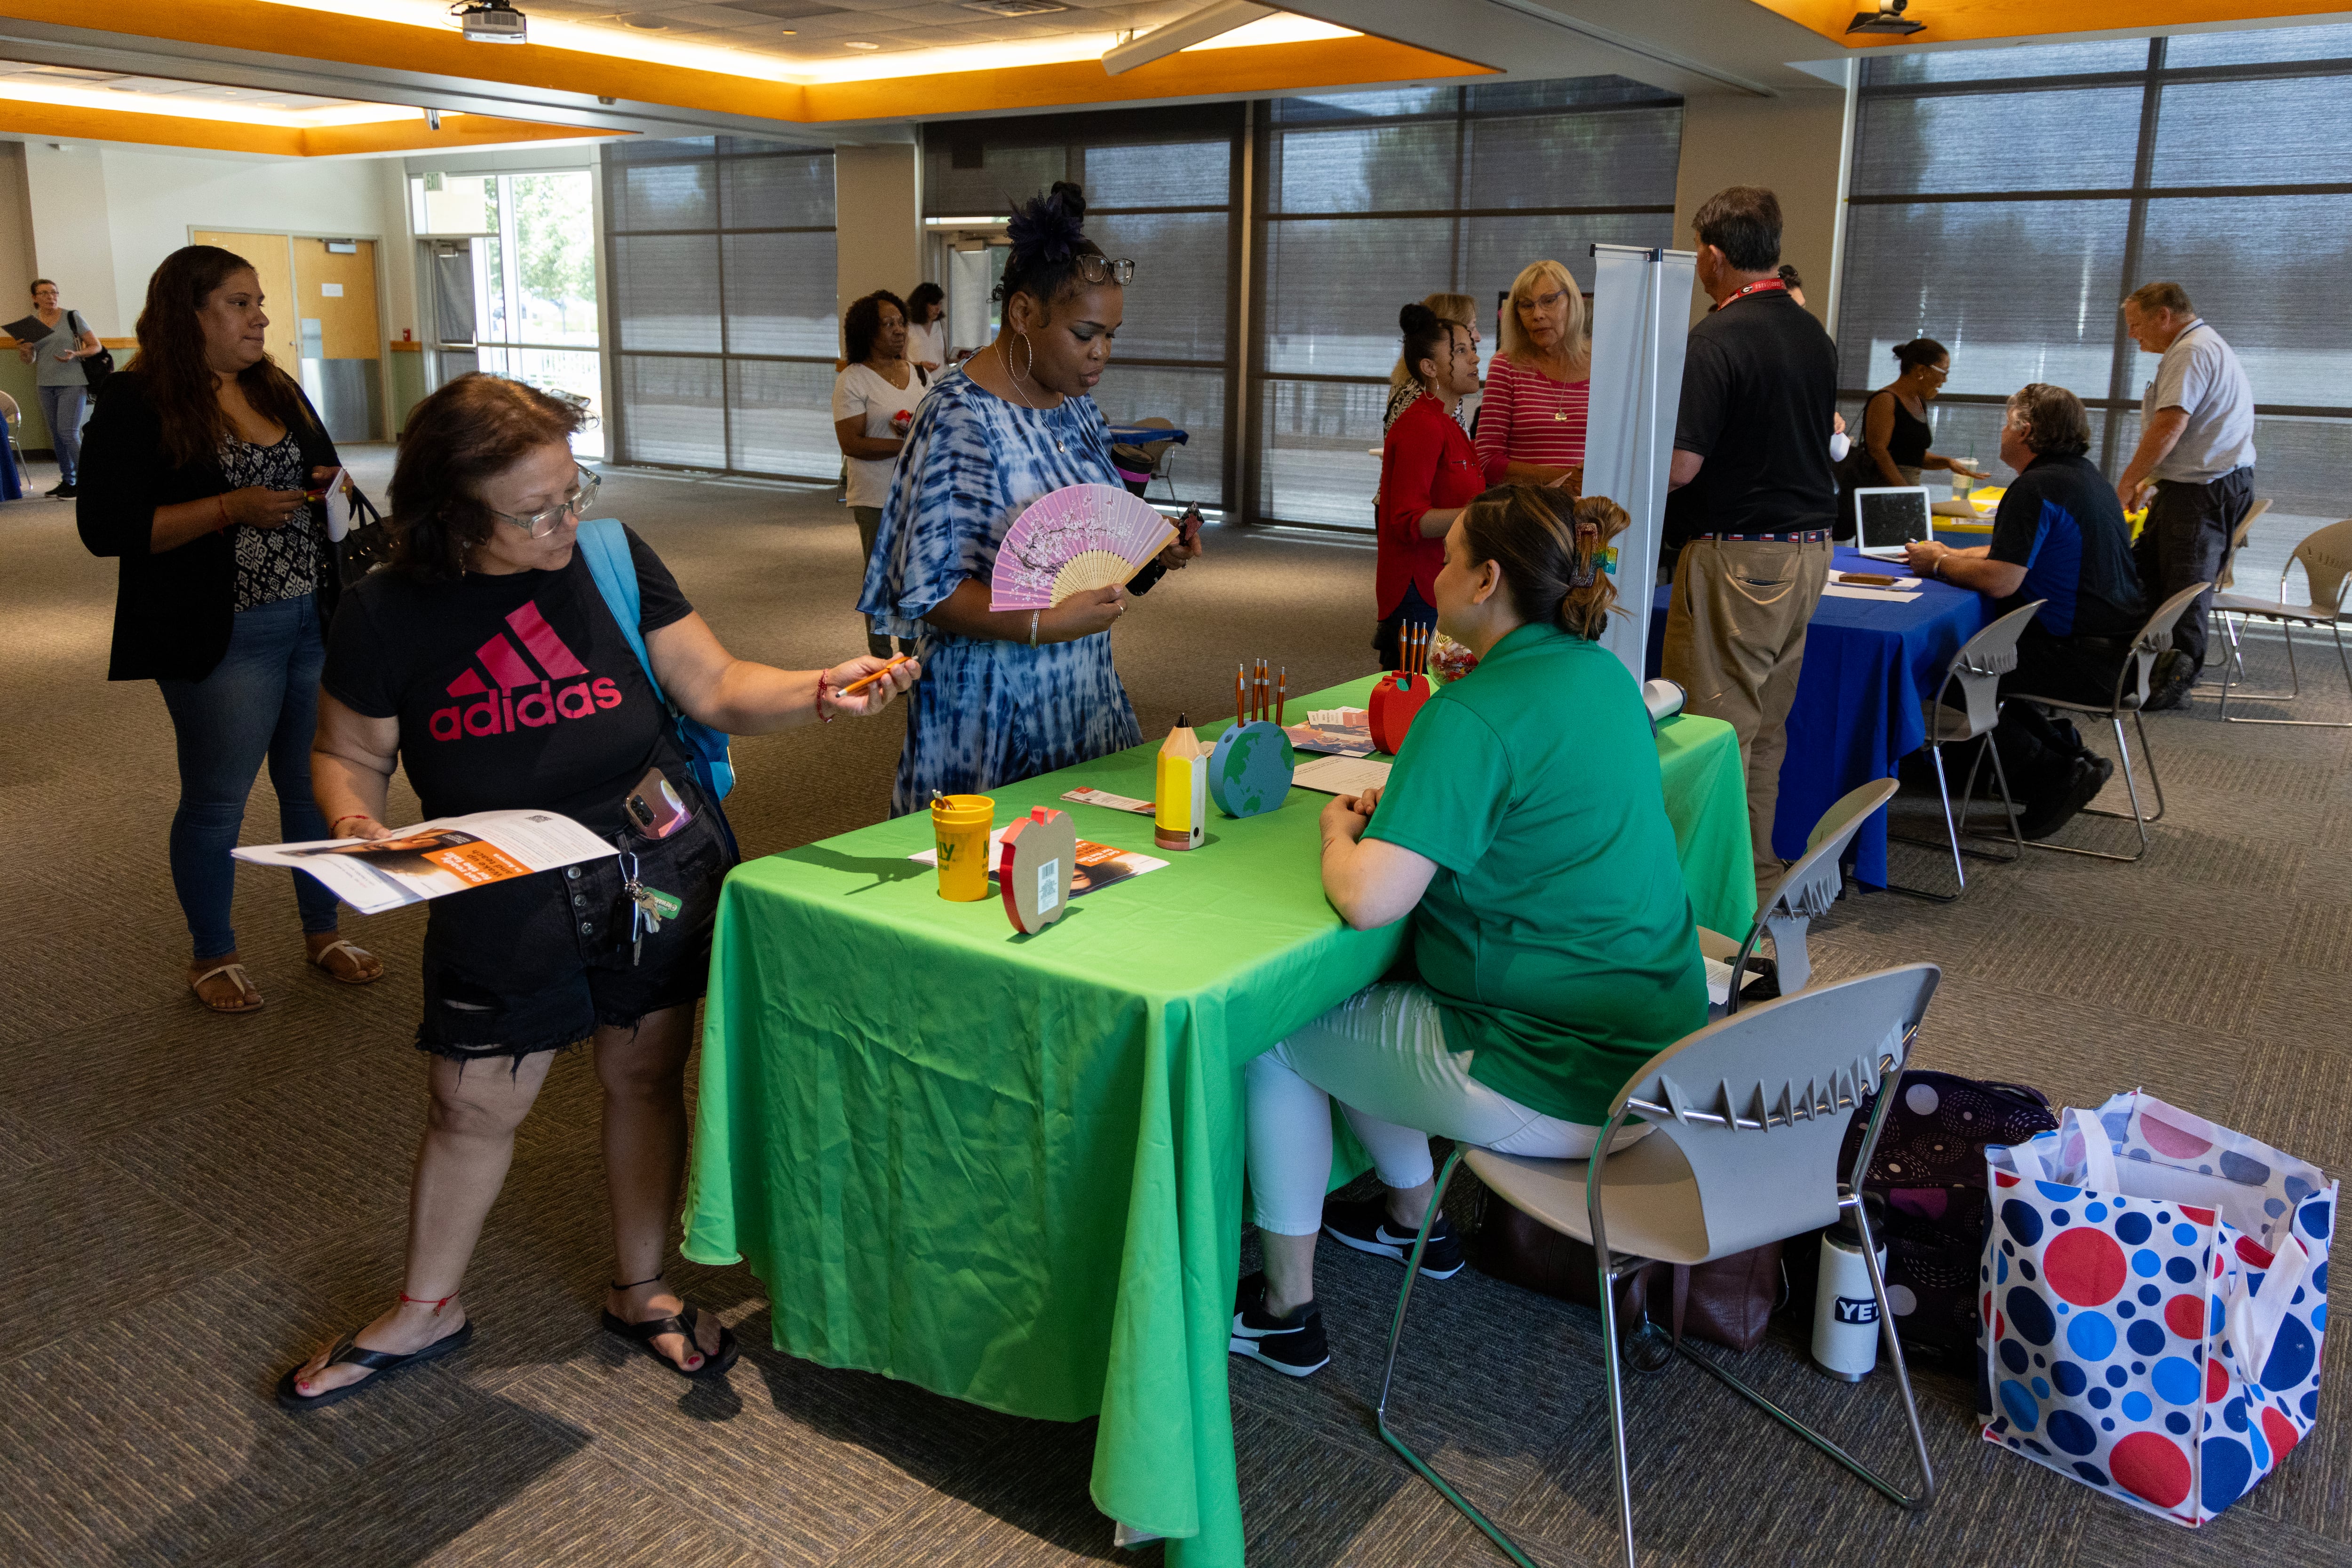 Two women stand in front of a job fair table staffed by a recruiter in a green shirt.